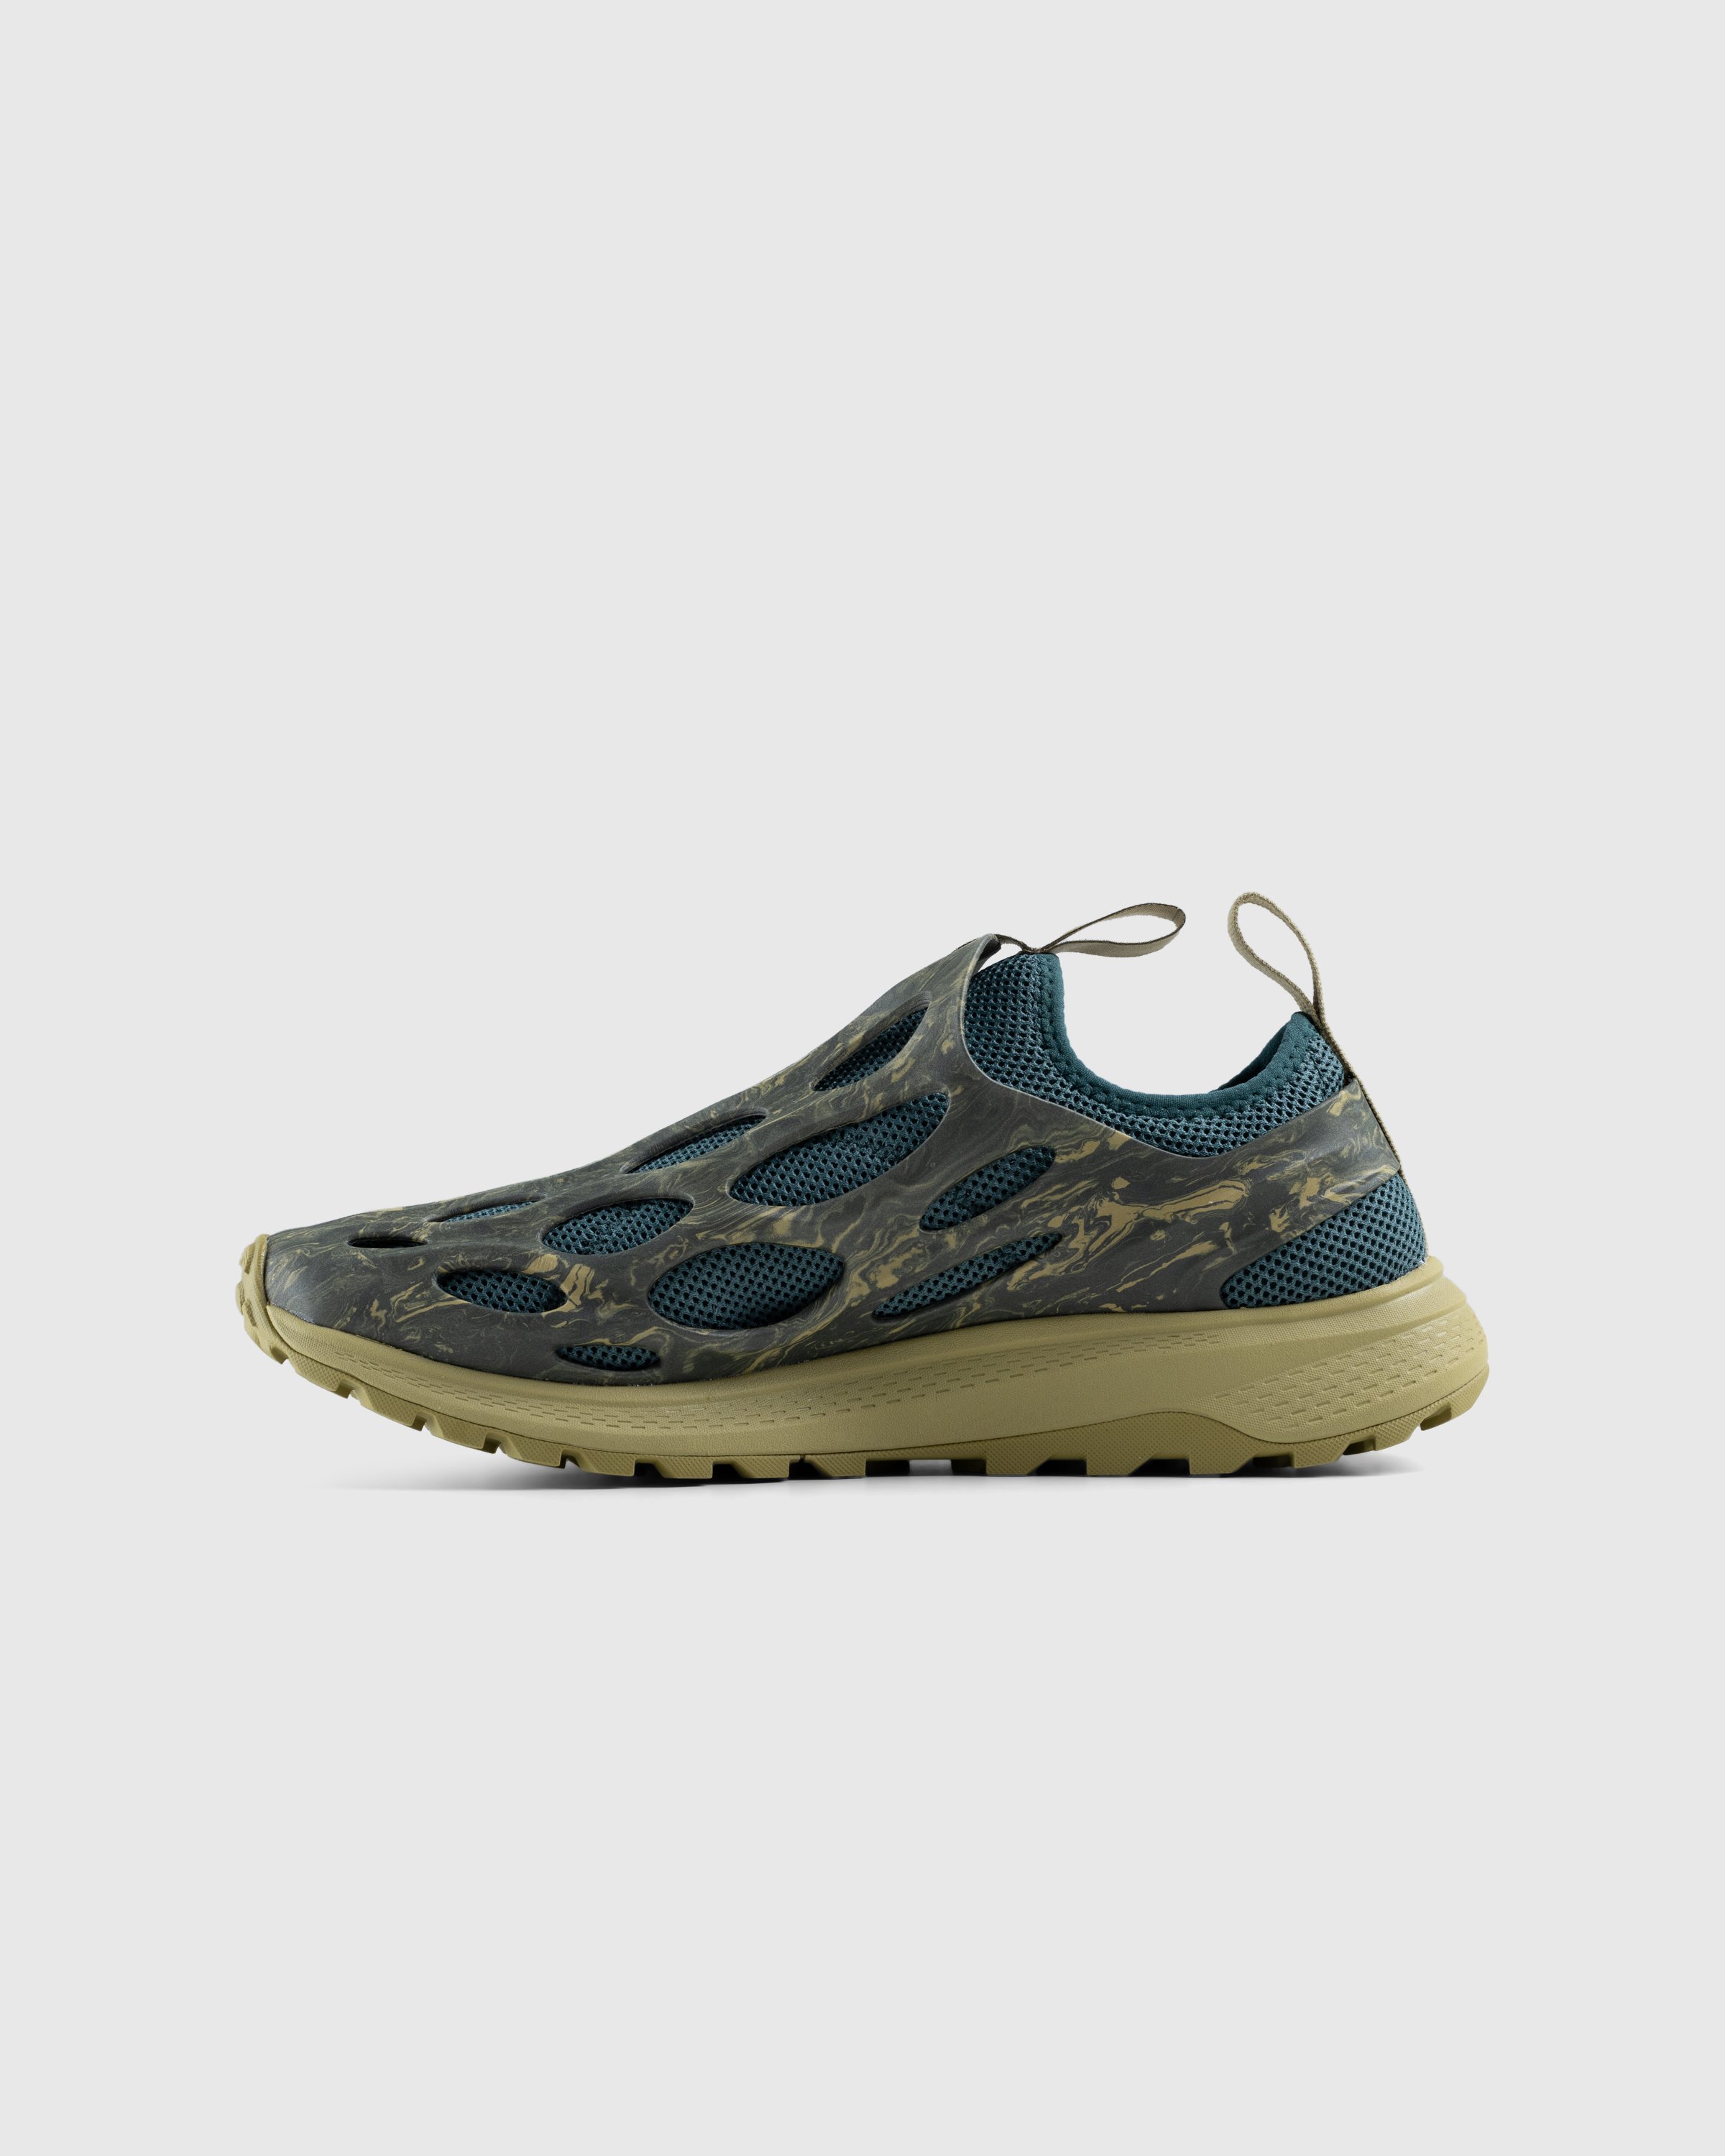 Merrell x Reese Cooper - Hydro Runner Forest Night - Footwear - Green - Image 2